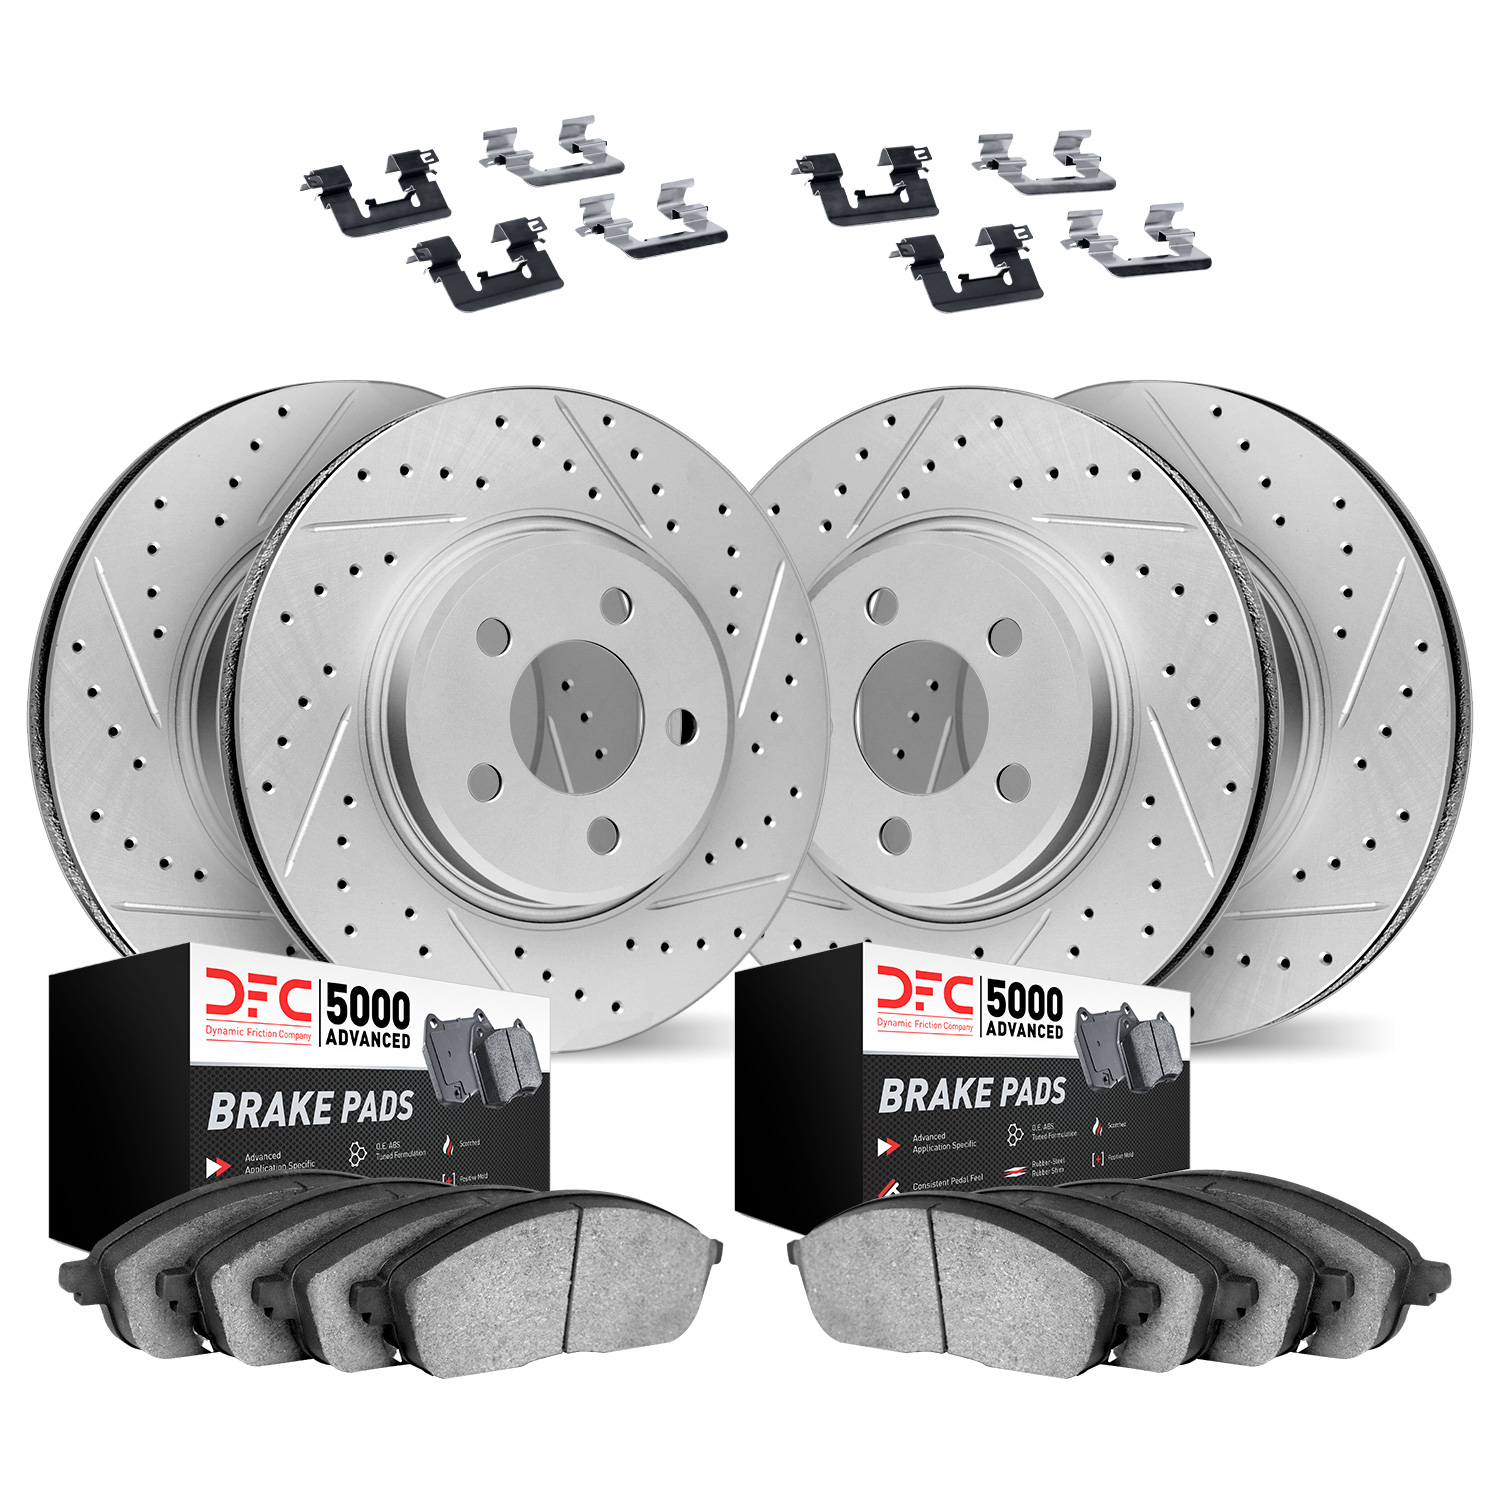 2514-46019 Geoperformance Drilled/Slotted Rotors w/5000 Advanced Brake Pads Kit & Hardware, 2008-2014 GM, Position: Front and Re